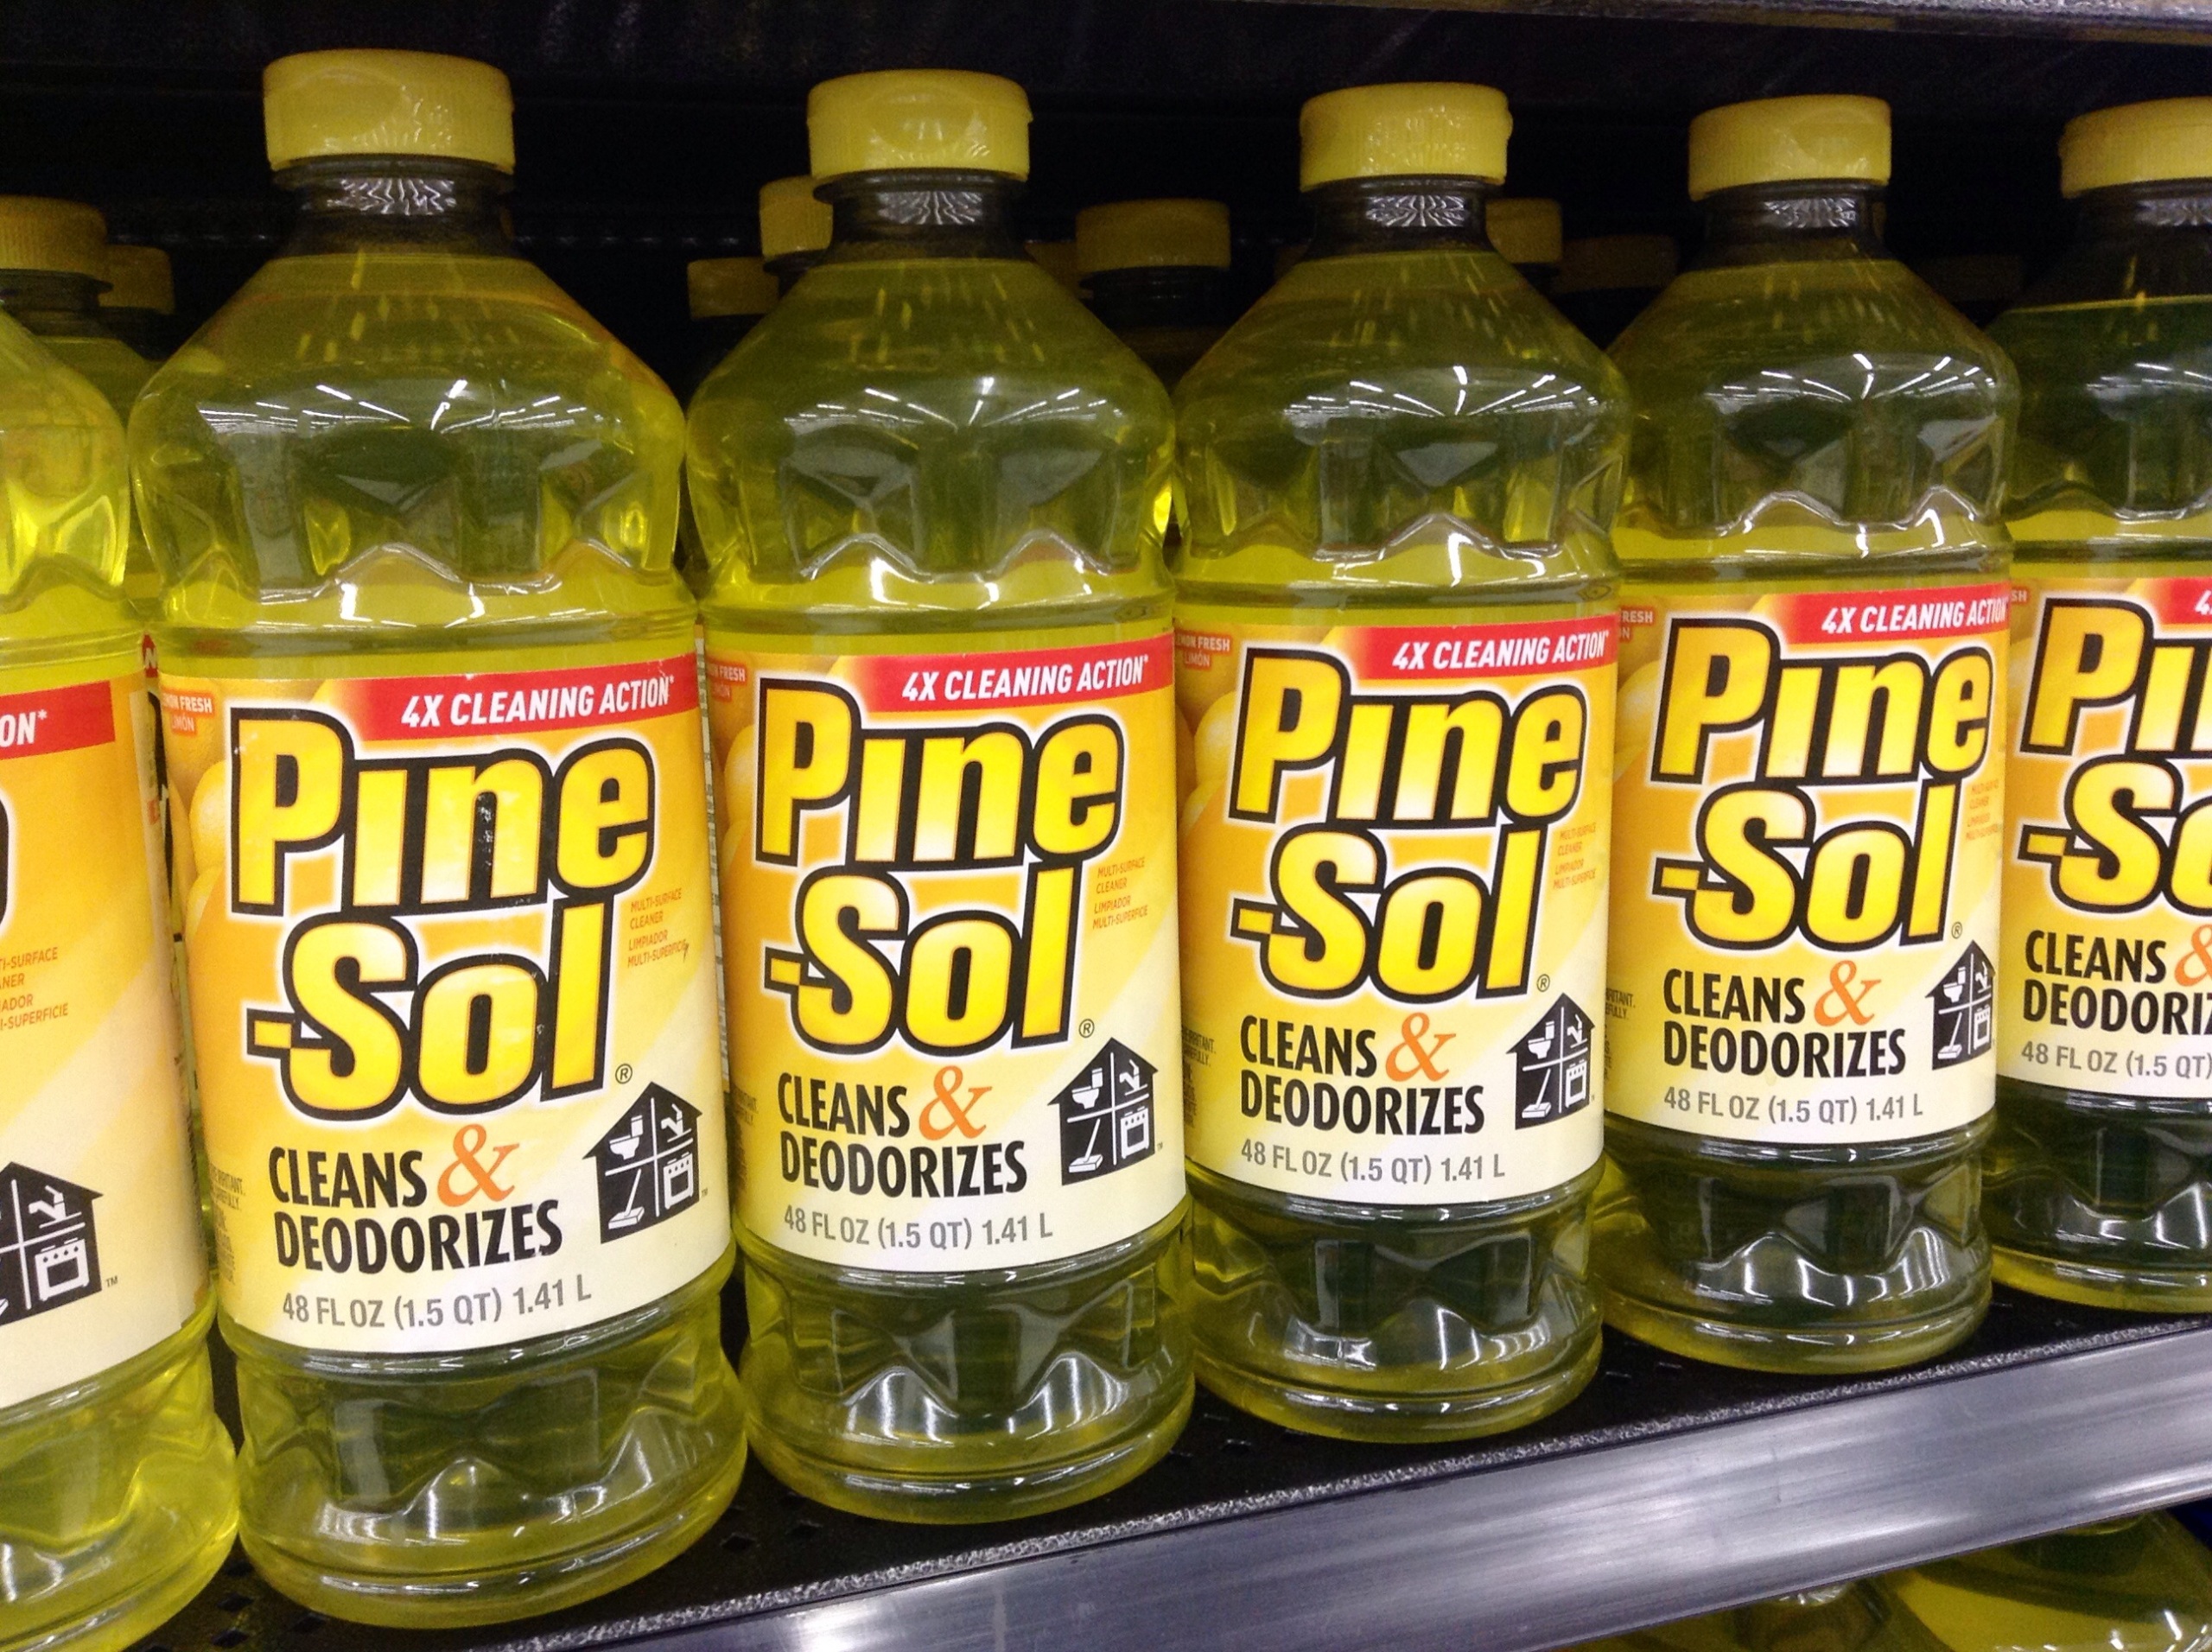 Bottles of Pine-Sol displayed on a store shelf